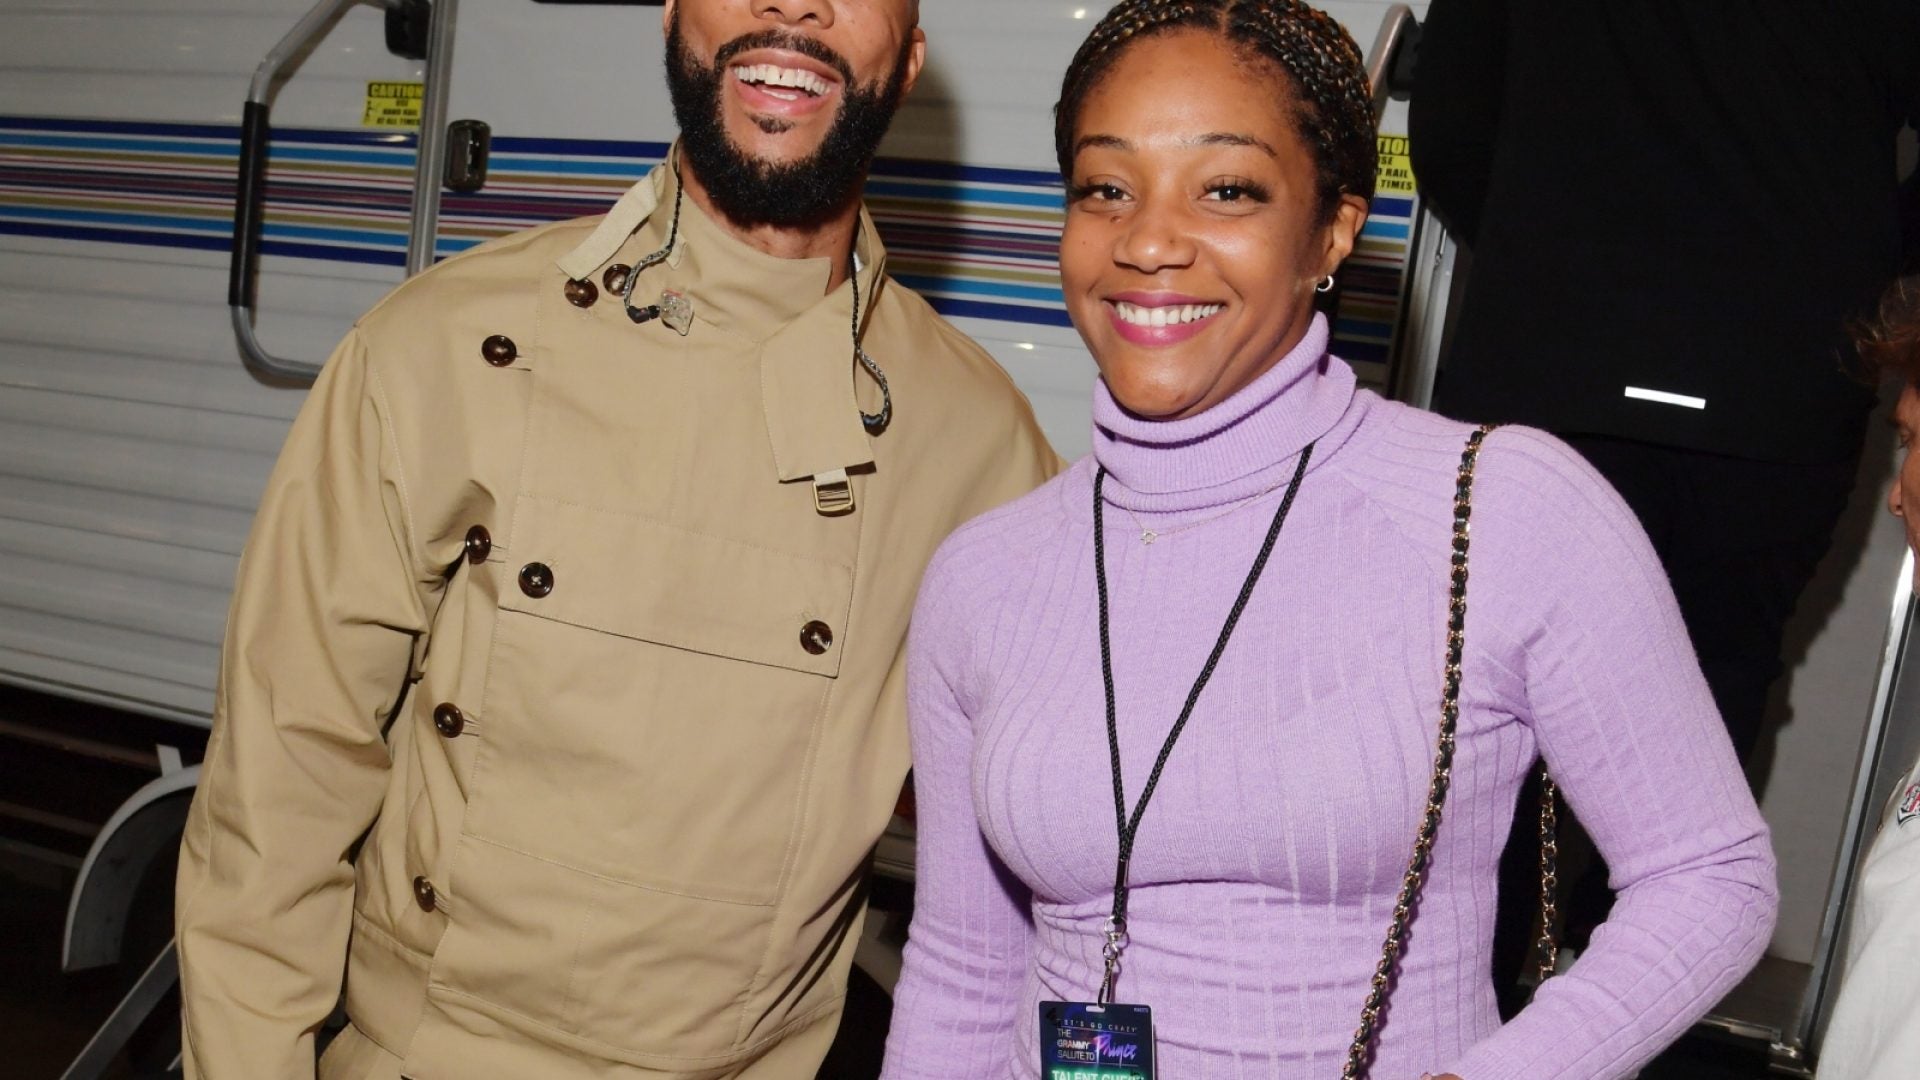 The Nicest Thing Common Has Ever Done For Tiffany Haddish Will Surprise You: 'It Don't Take Much To Make Me Happy'